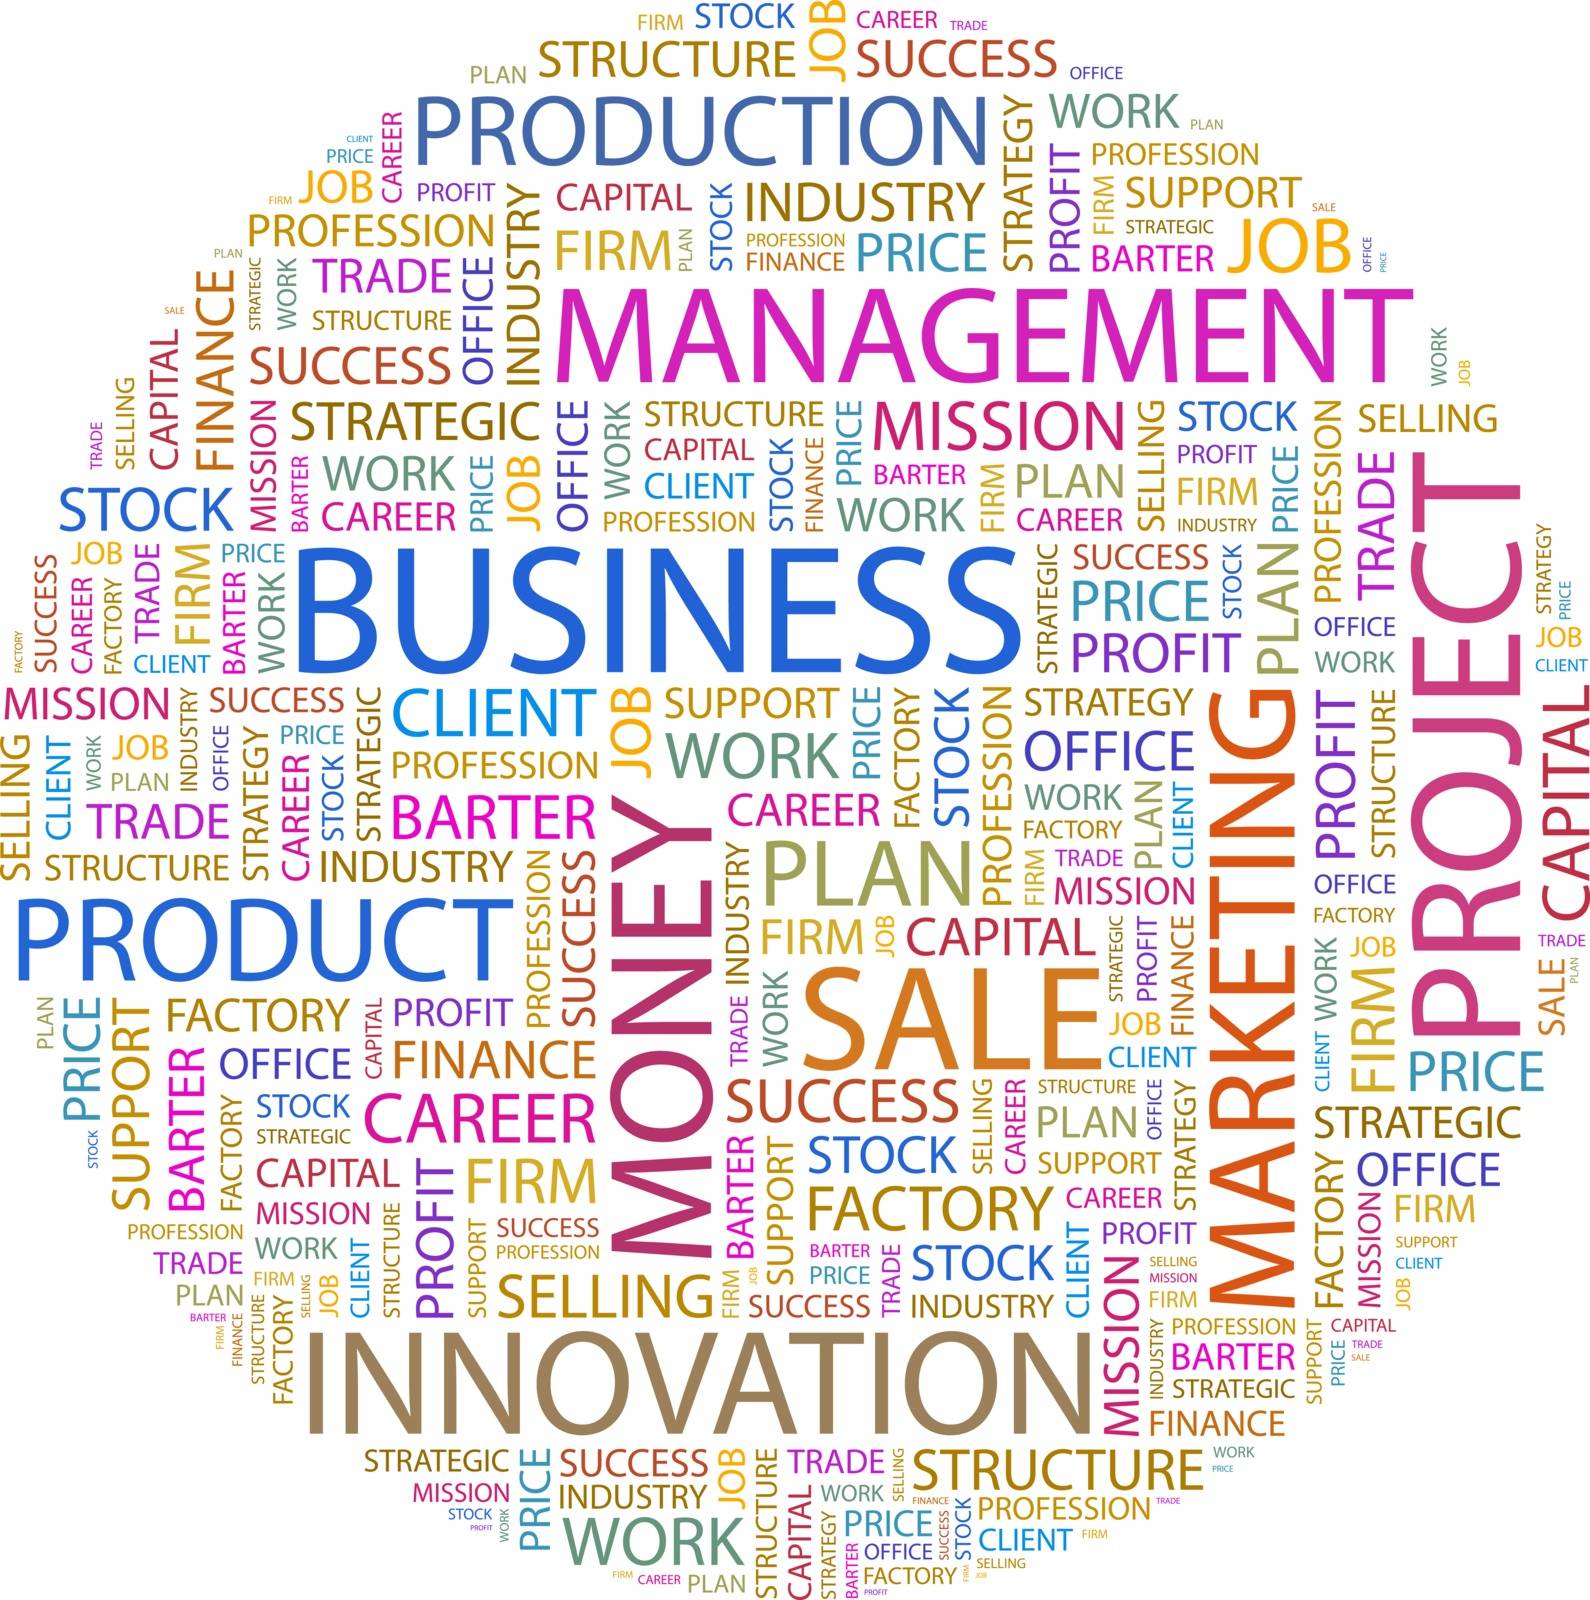 BUSINESS. Word cloud illustration. Tag cloud concept collage.